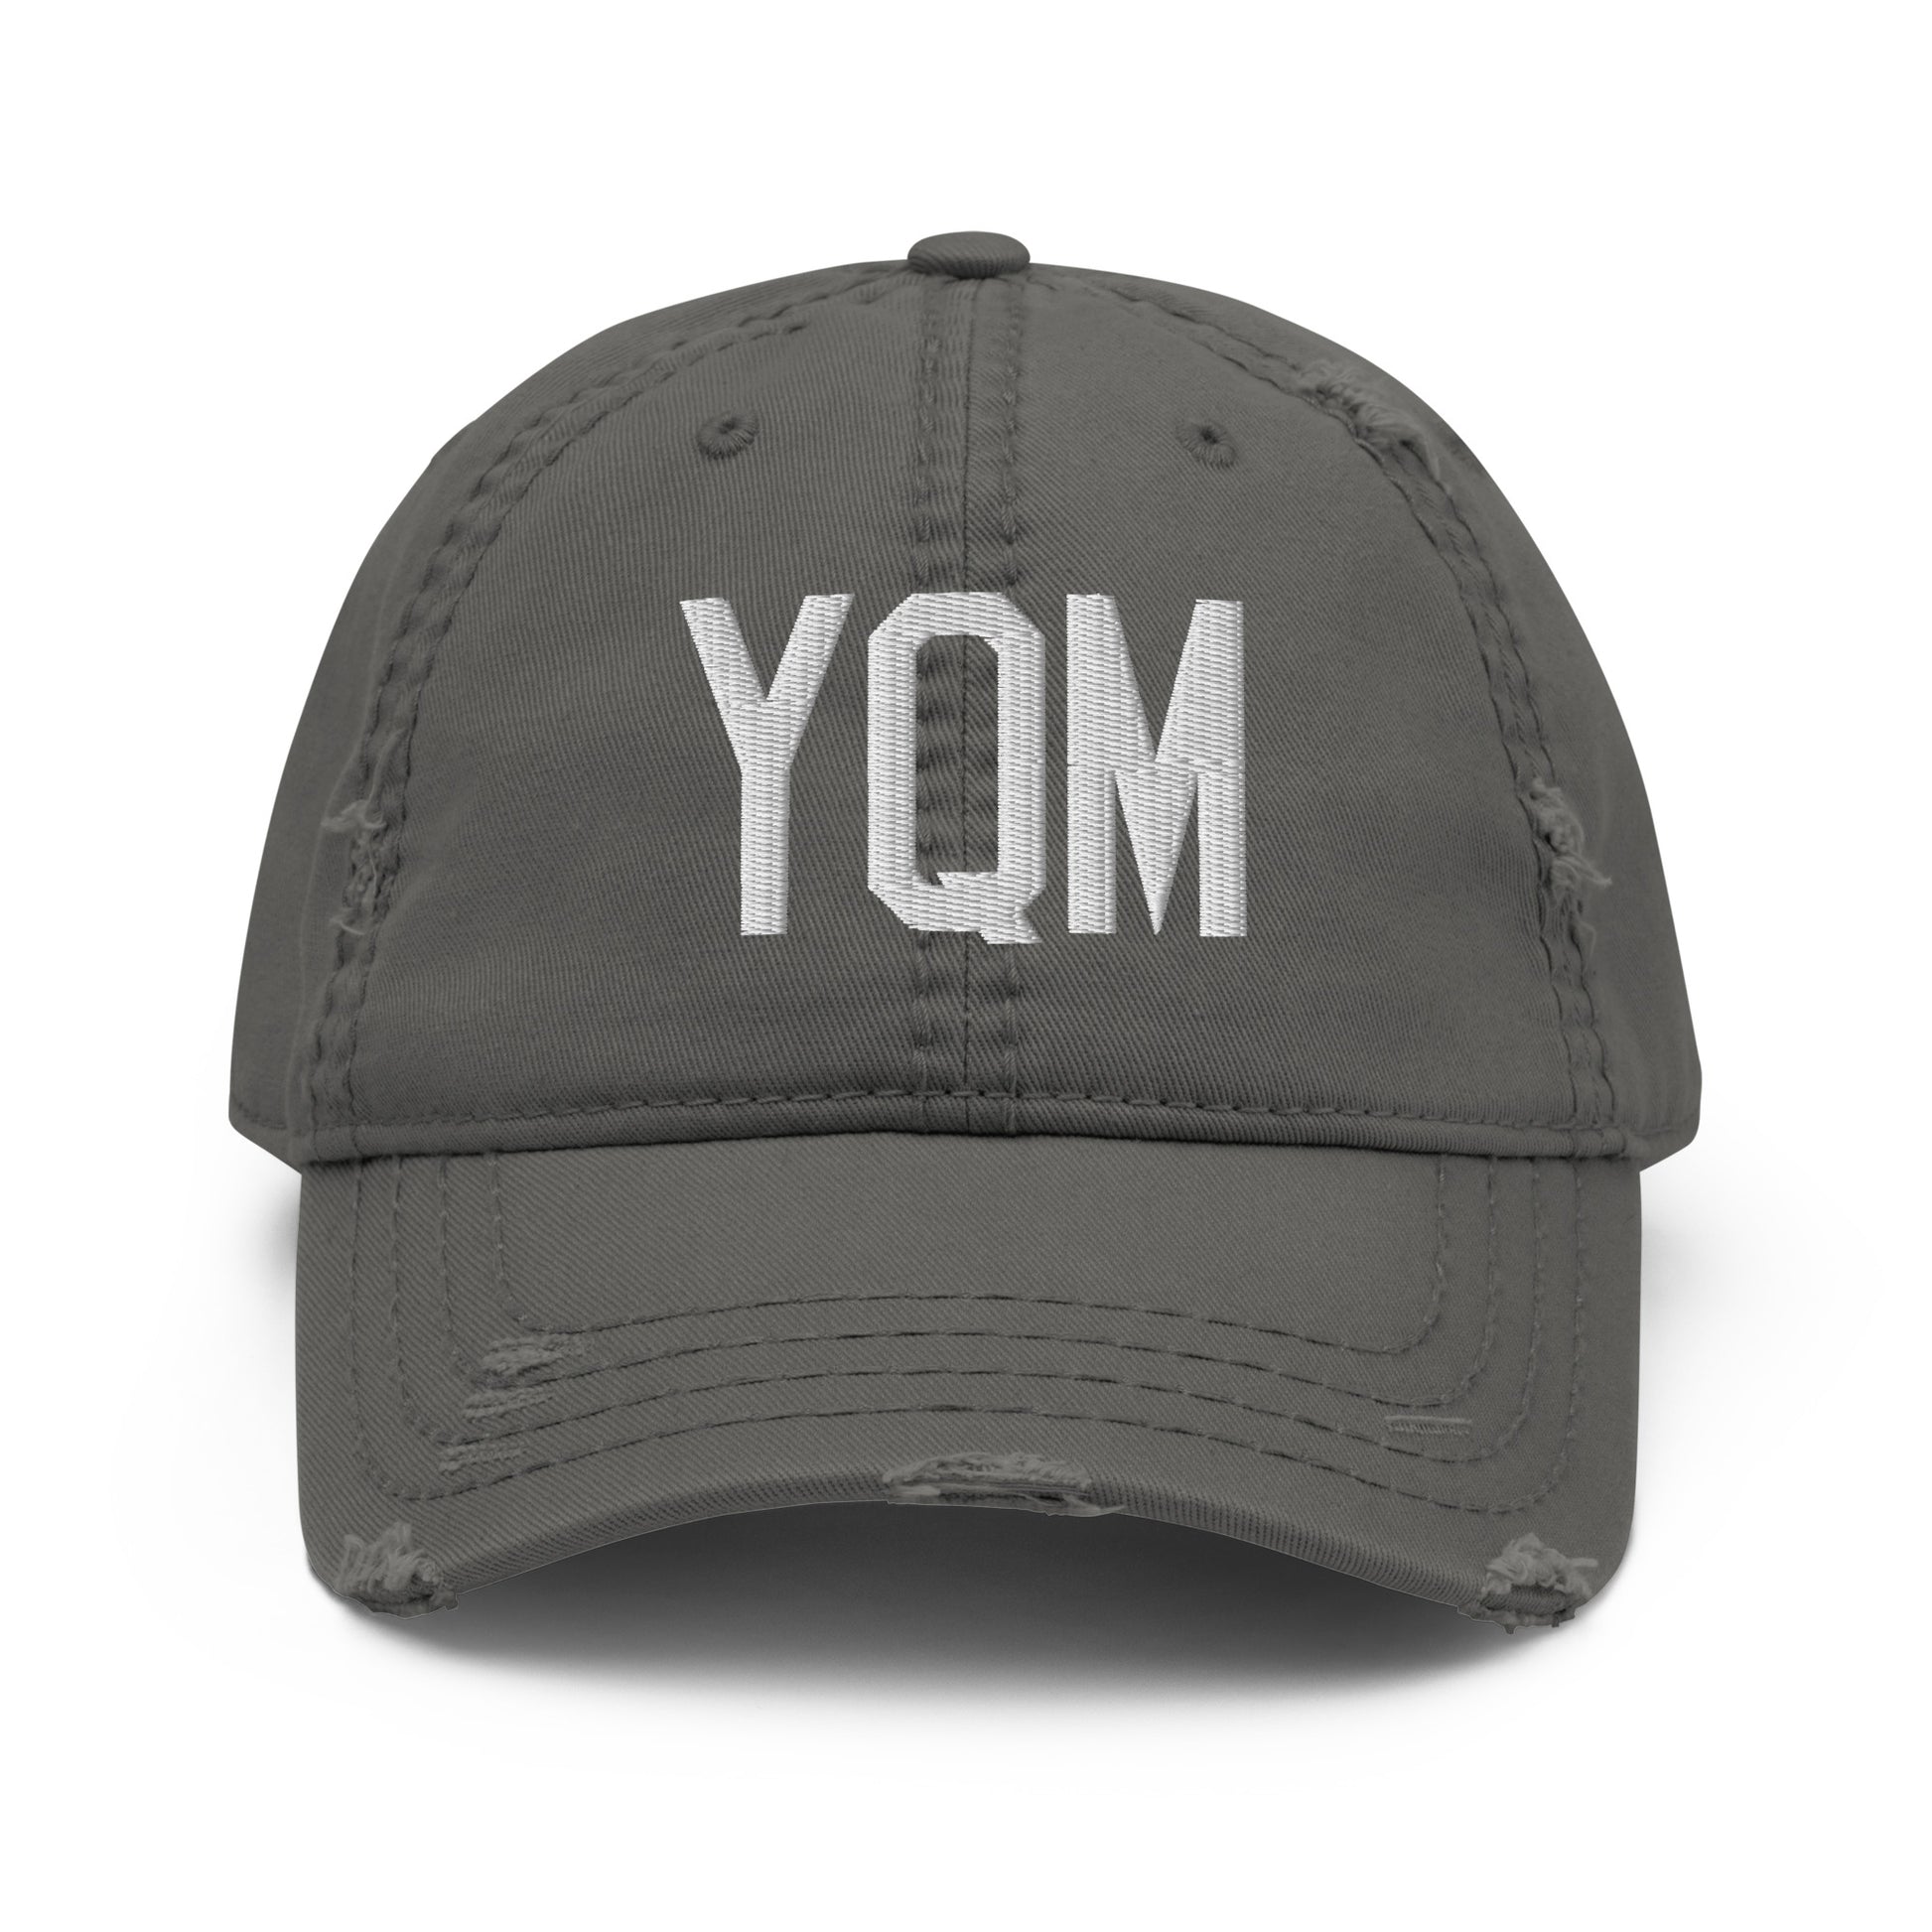 Airport Code Distressed Hat - White • YQM Moncton • YHM Designs - Image 15